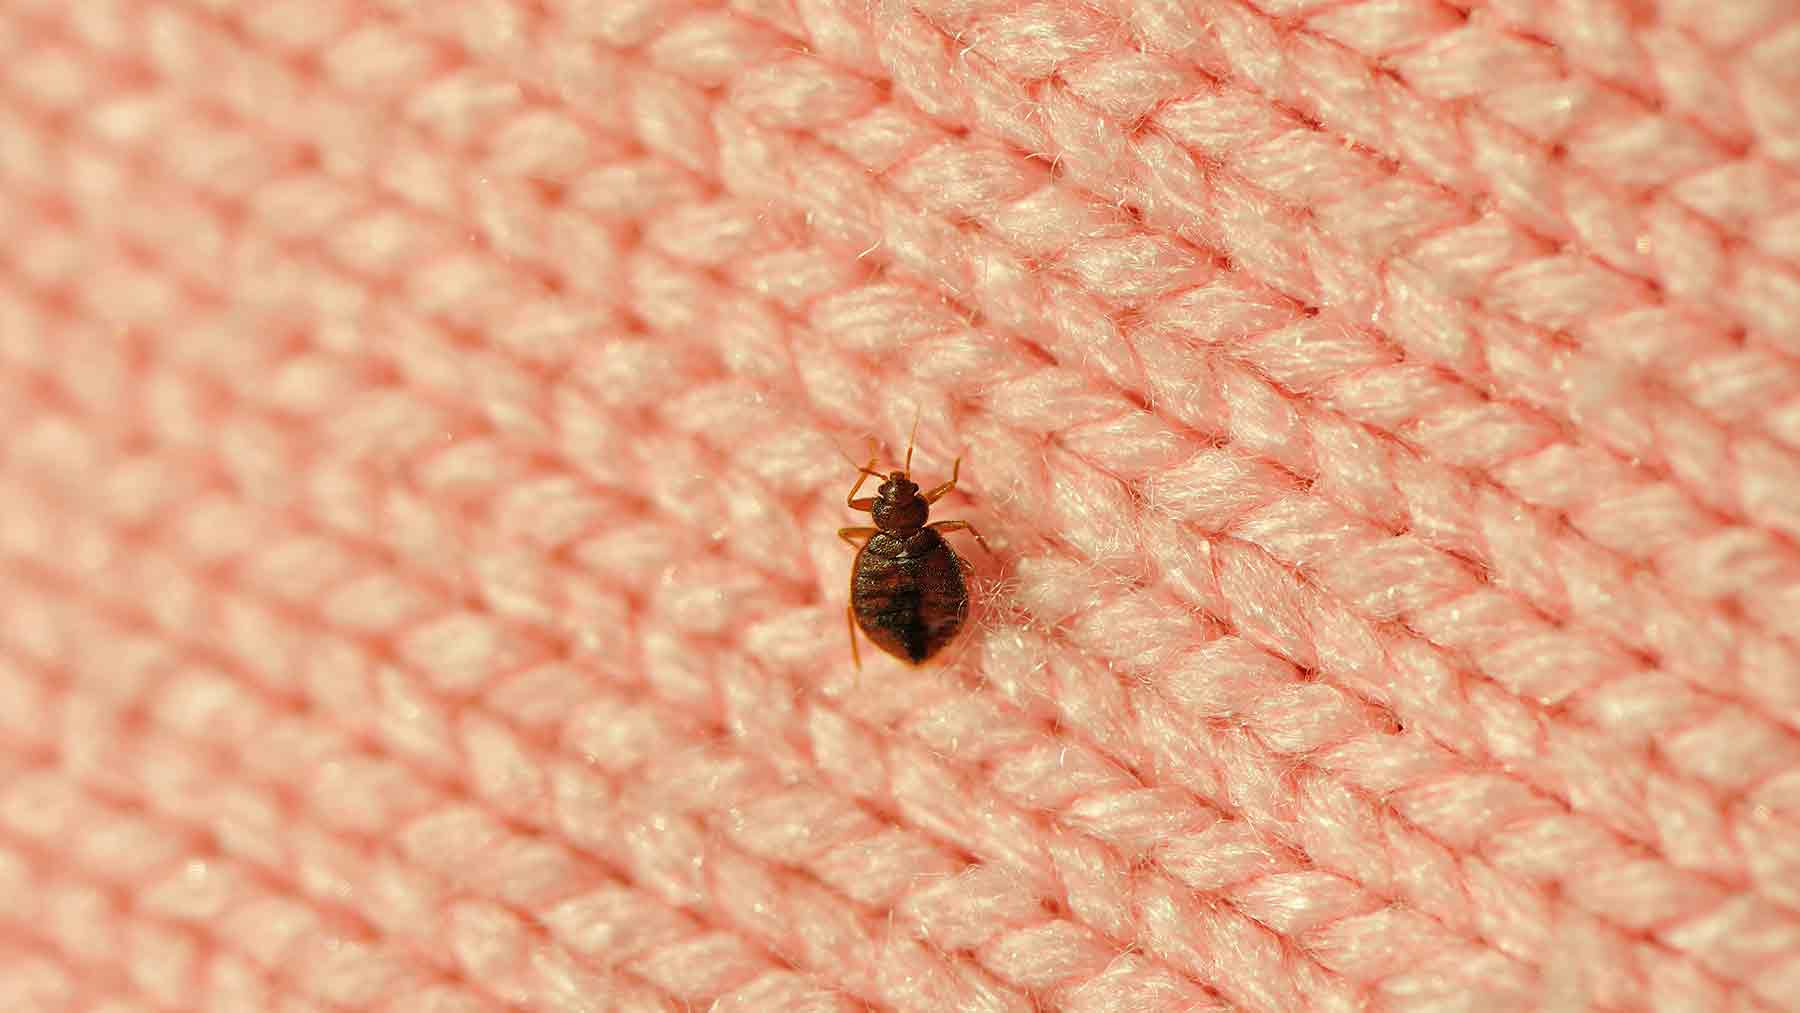 How To Avoid Bed Bugs While Traveling, How To Protect From Bed Bugs